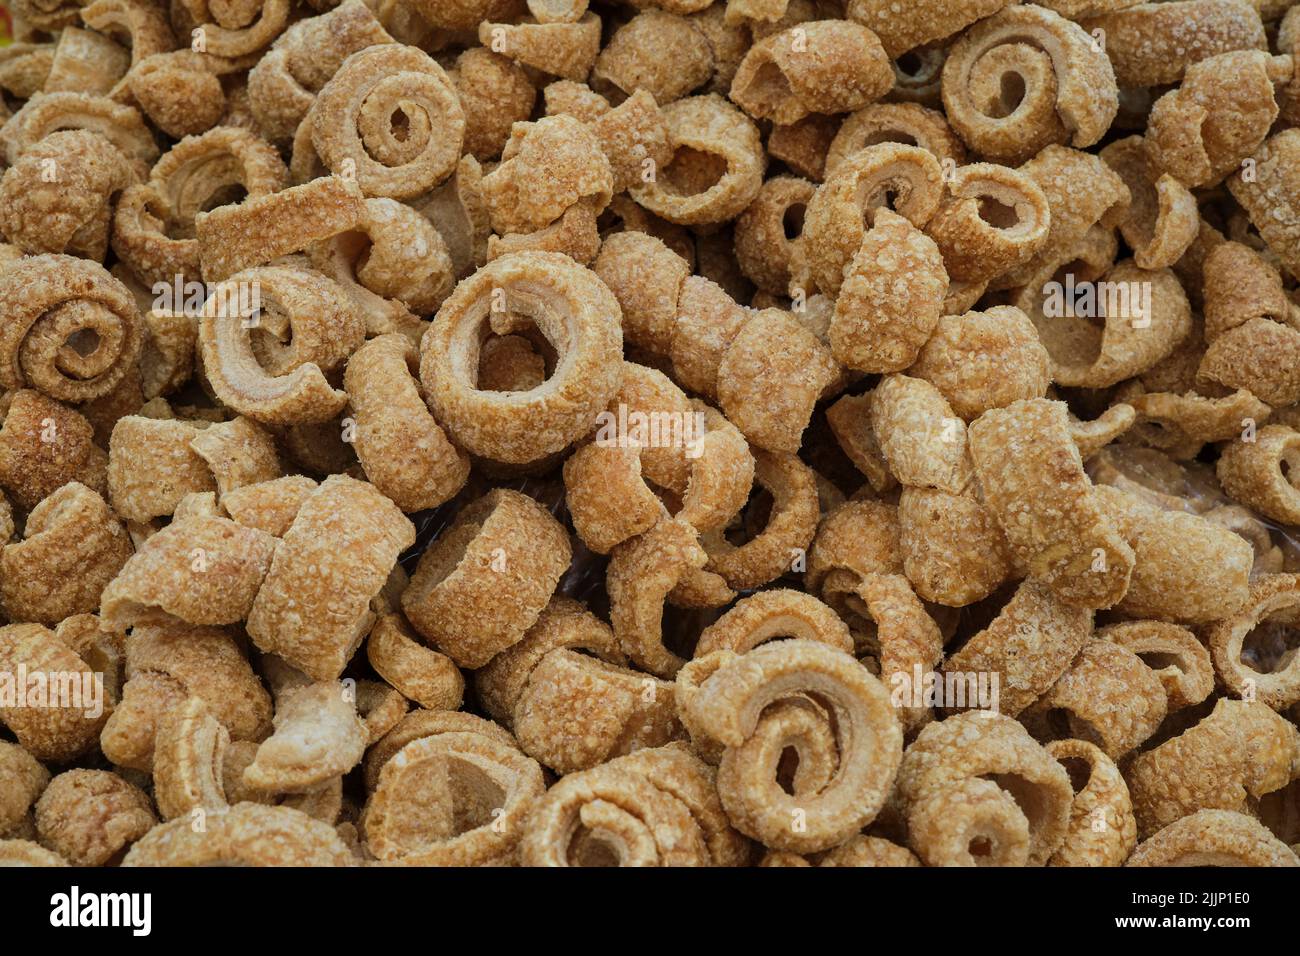 Top view of many coils of crispy fried bacon called torrezno placed in heap Stock Photo